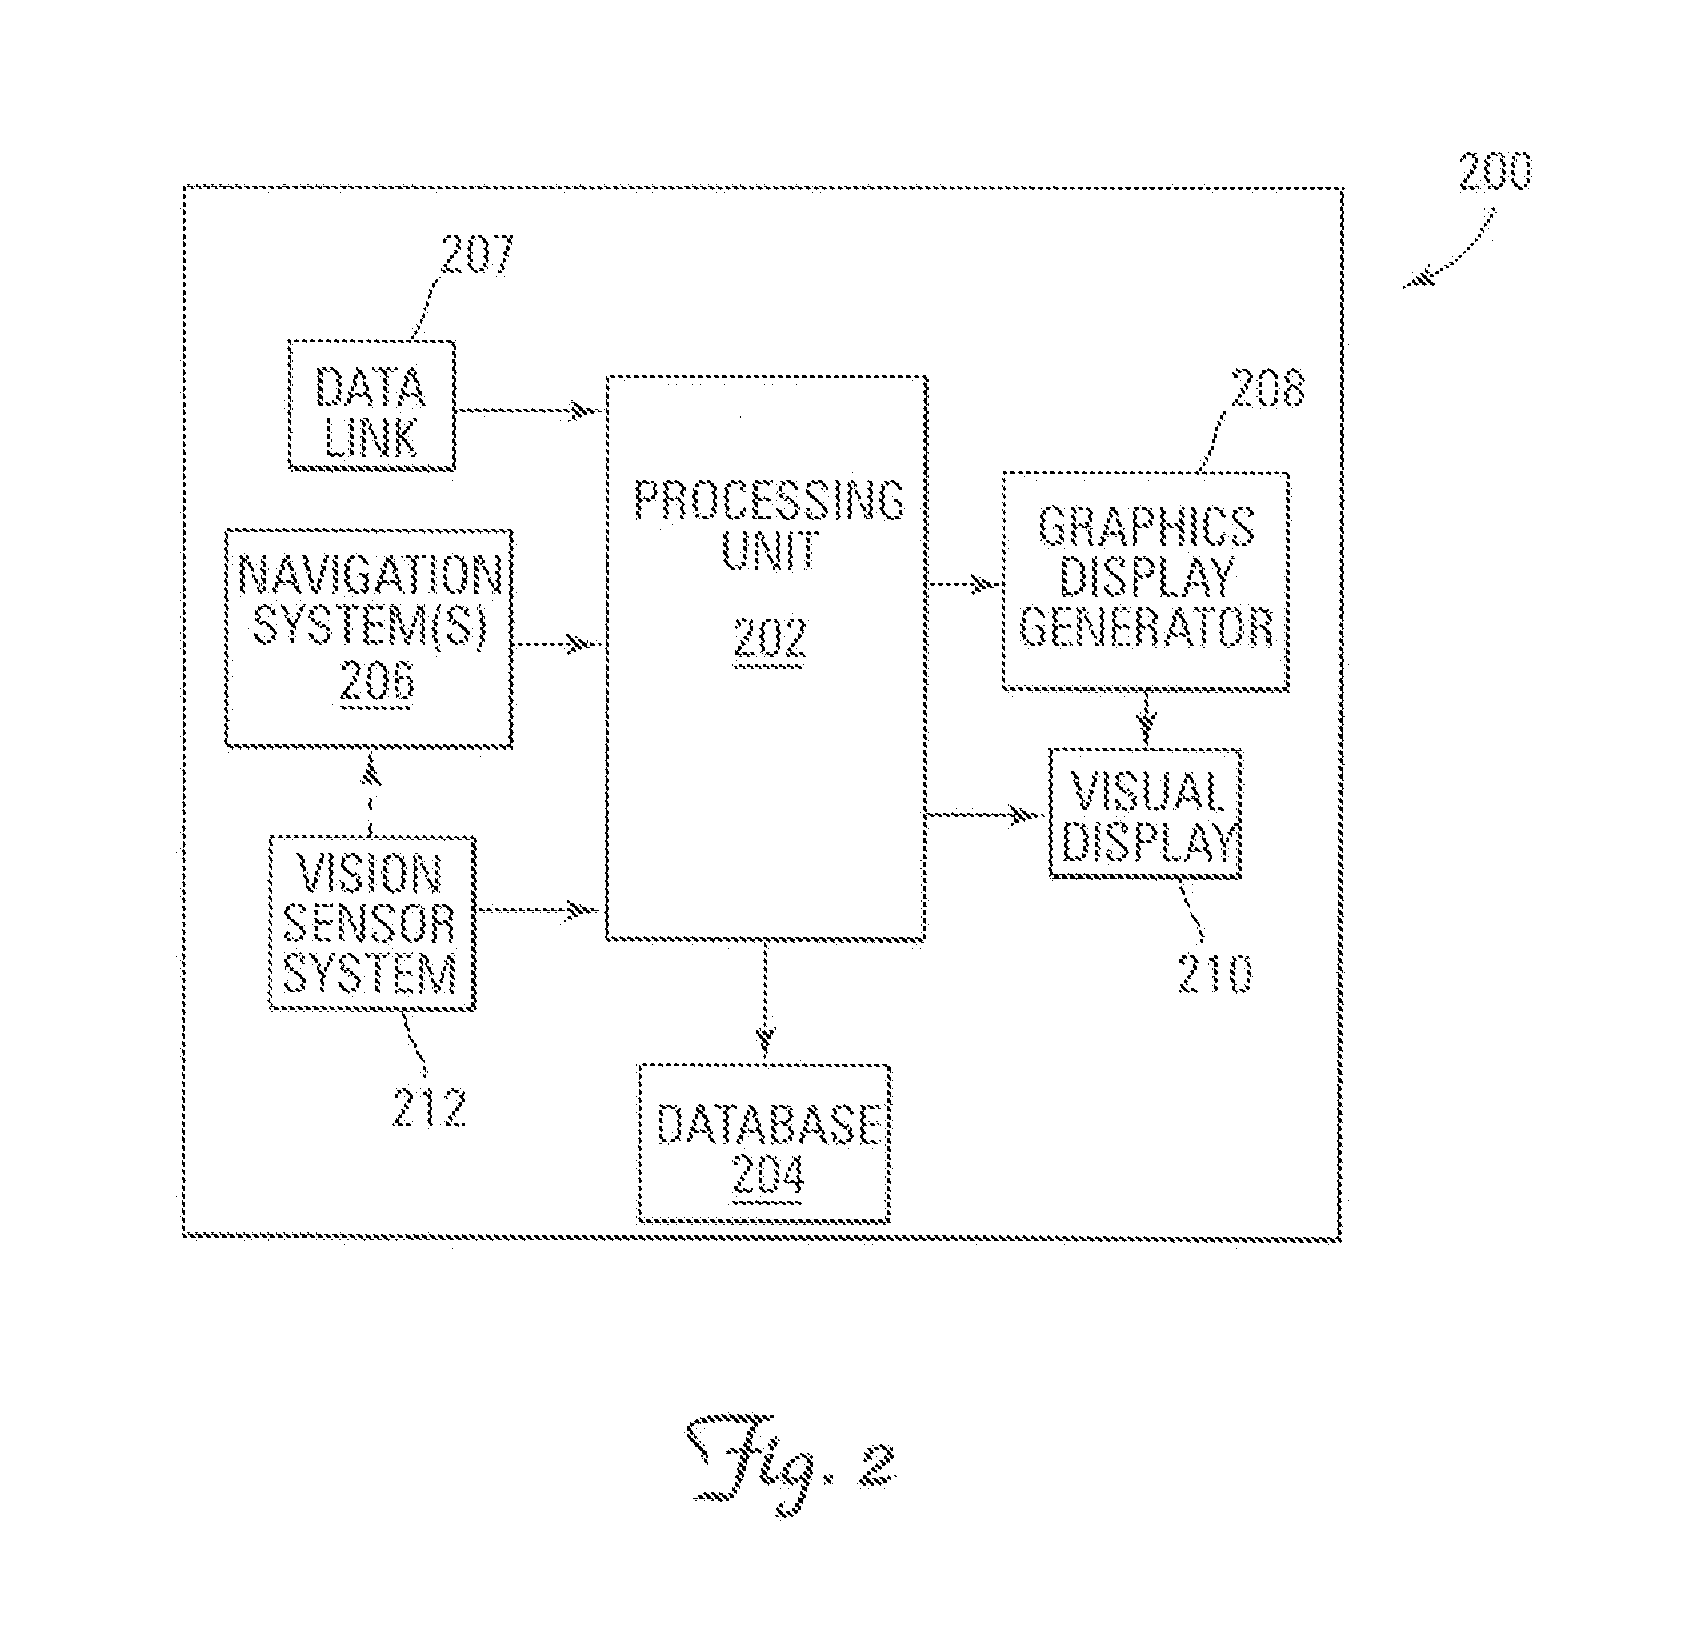 System and method for enhancing computer-generated images of terrain on aircraft displays